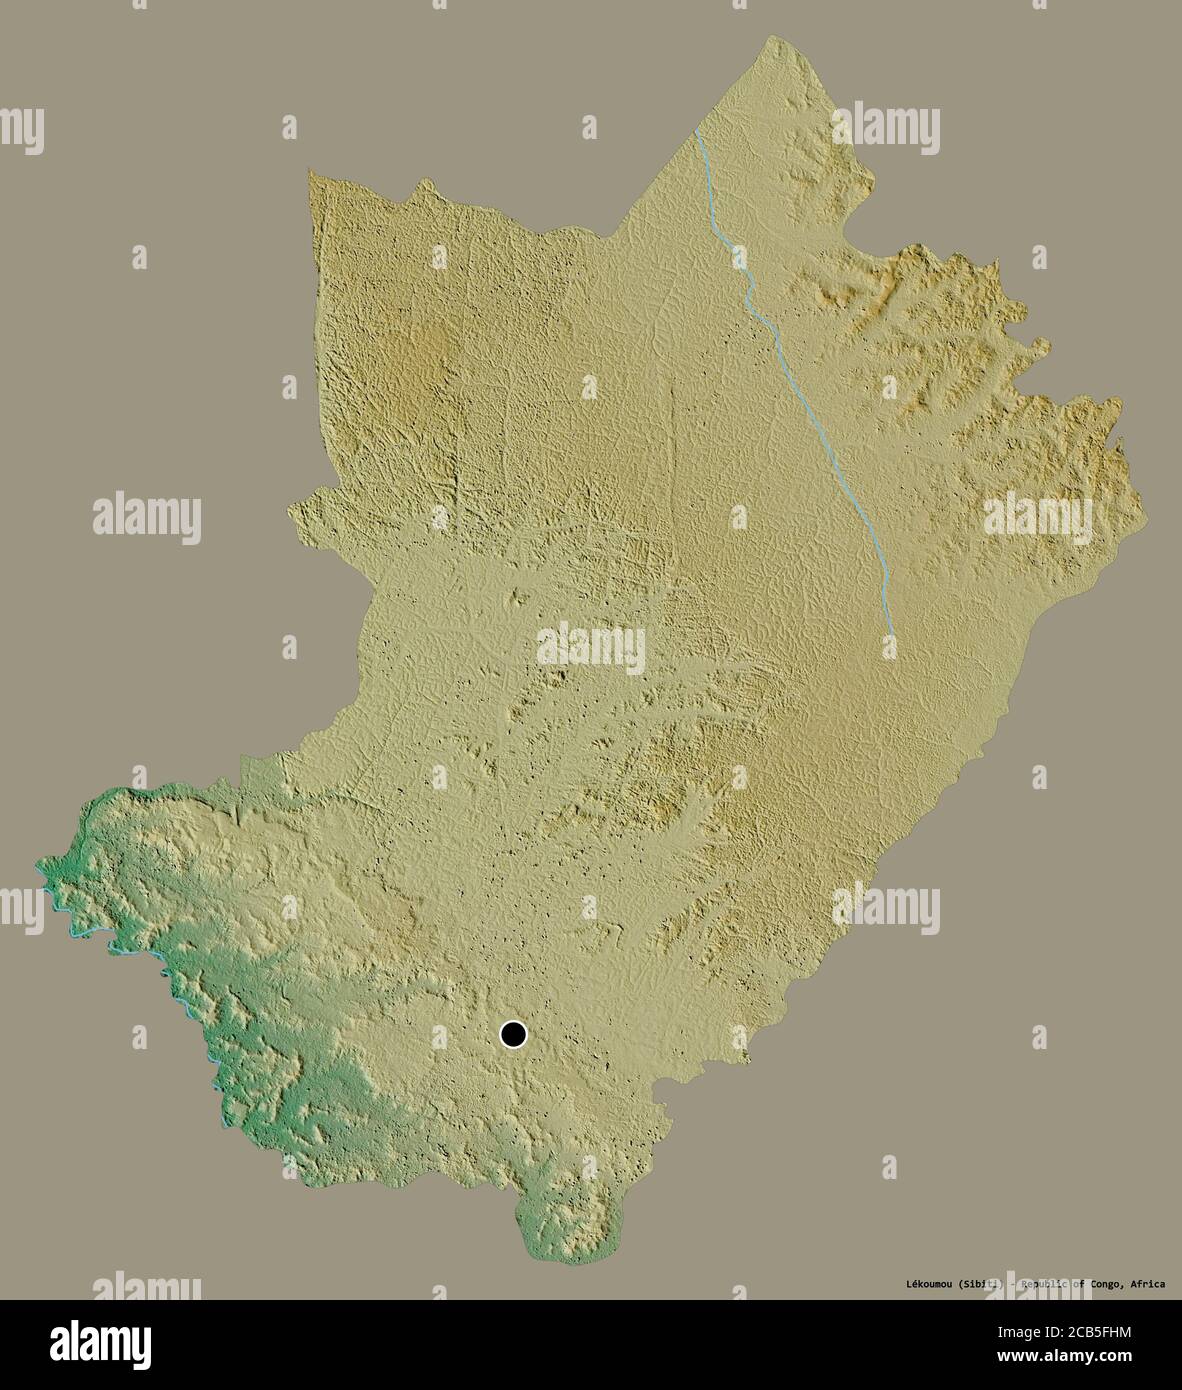 Shape of Lékoumou, region of Republic of Congo, with its capital isolated on a solid color background. Topographic relief map. 3D rendering Stock Photo